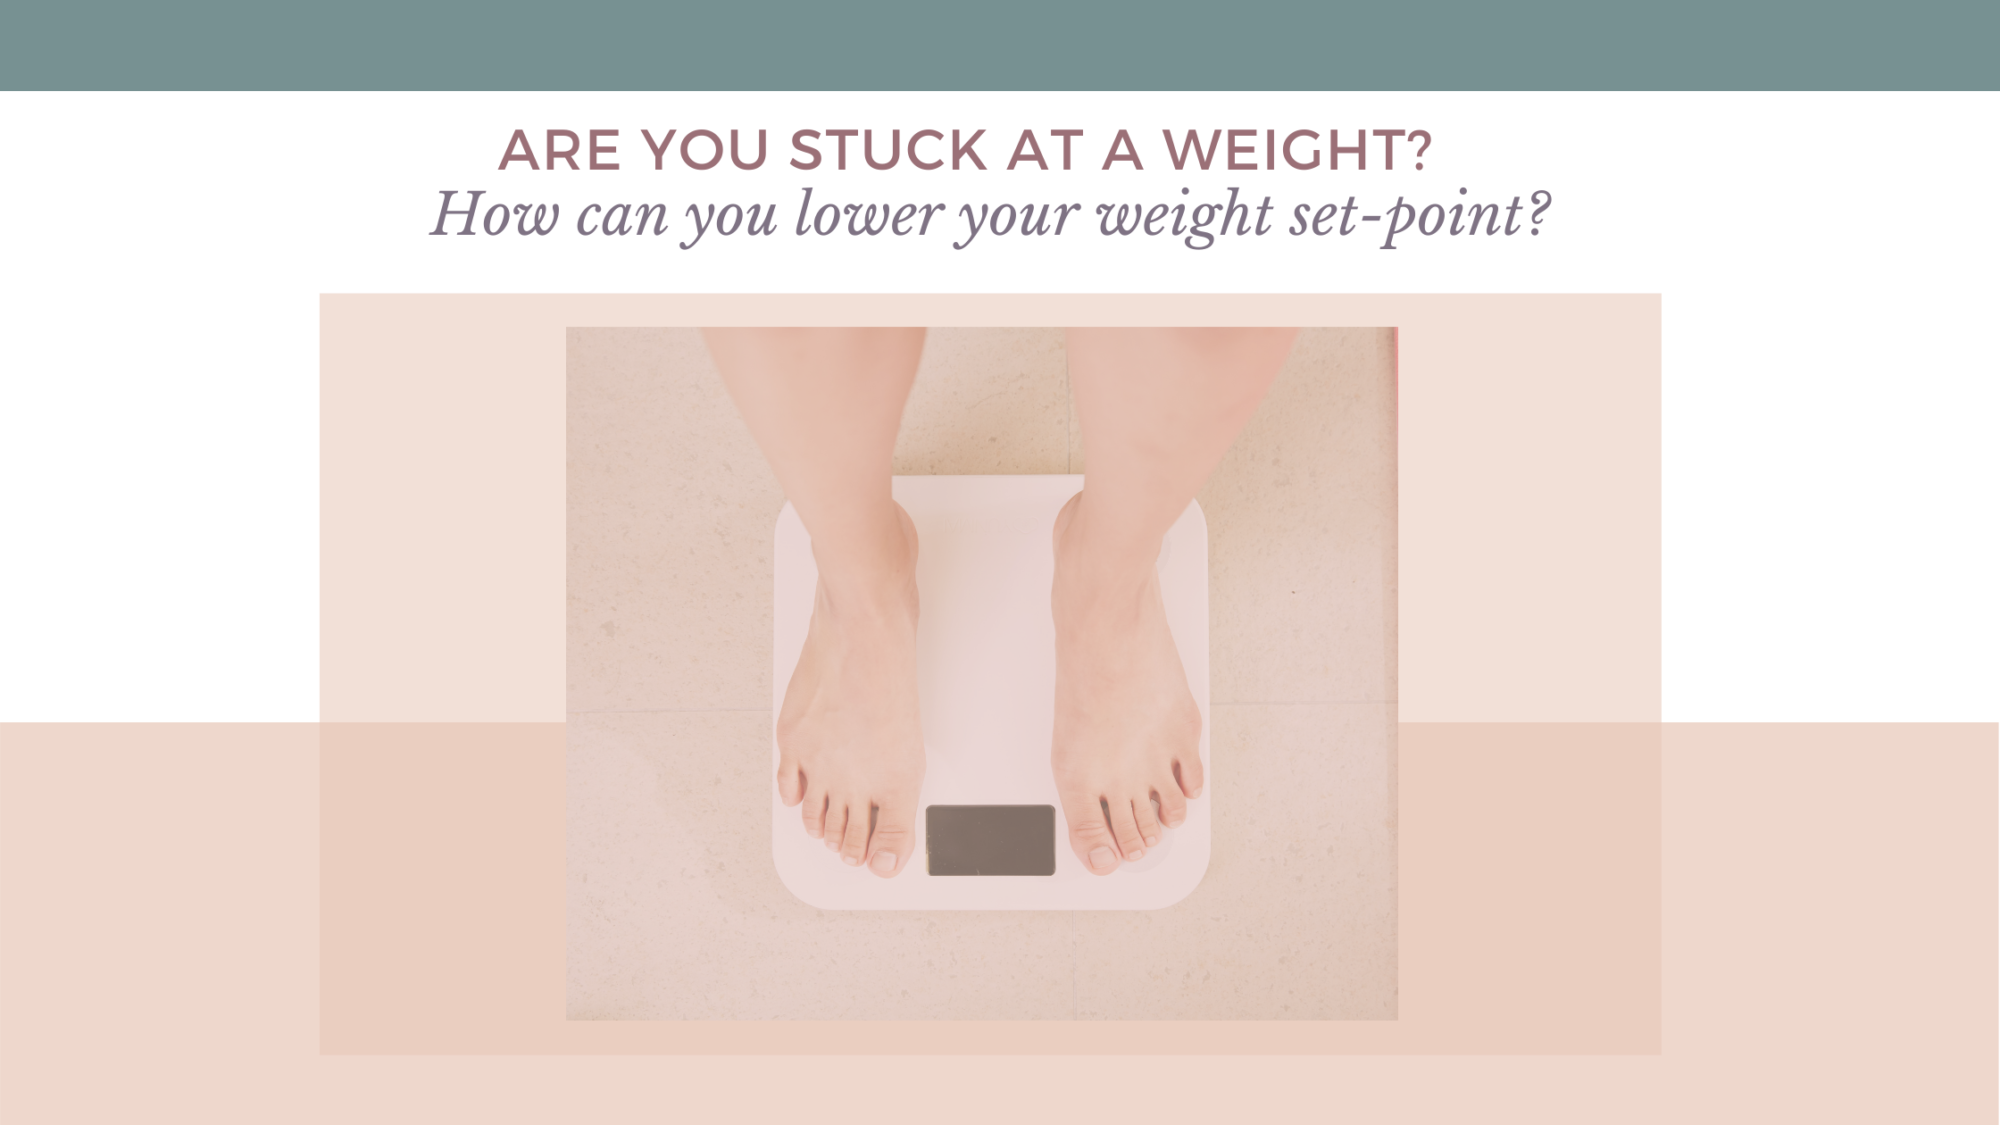 Are you stuck at a weight? How can you lower your weight set point?